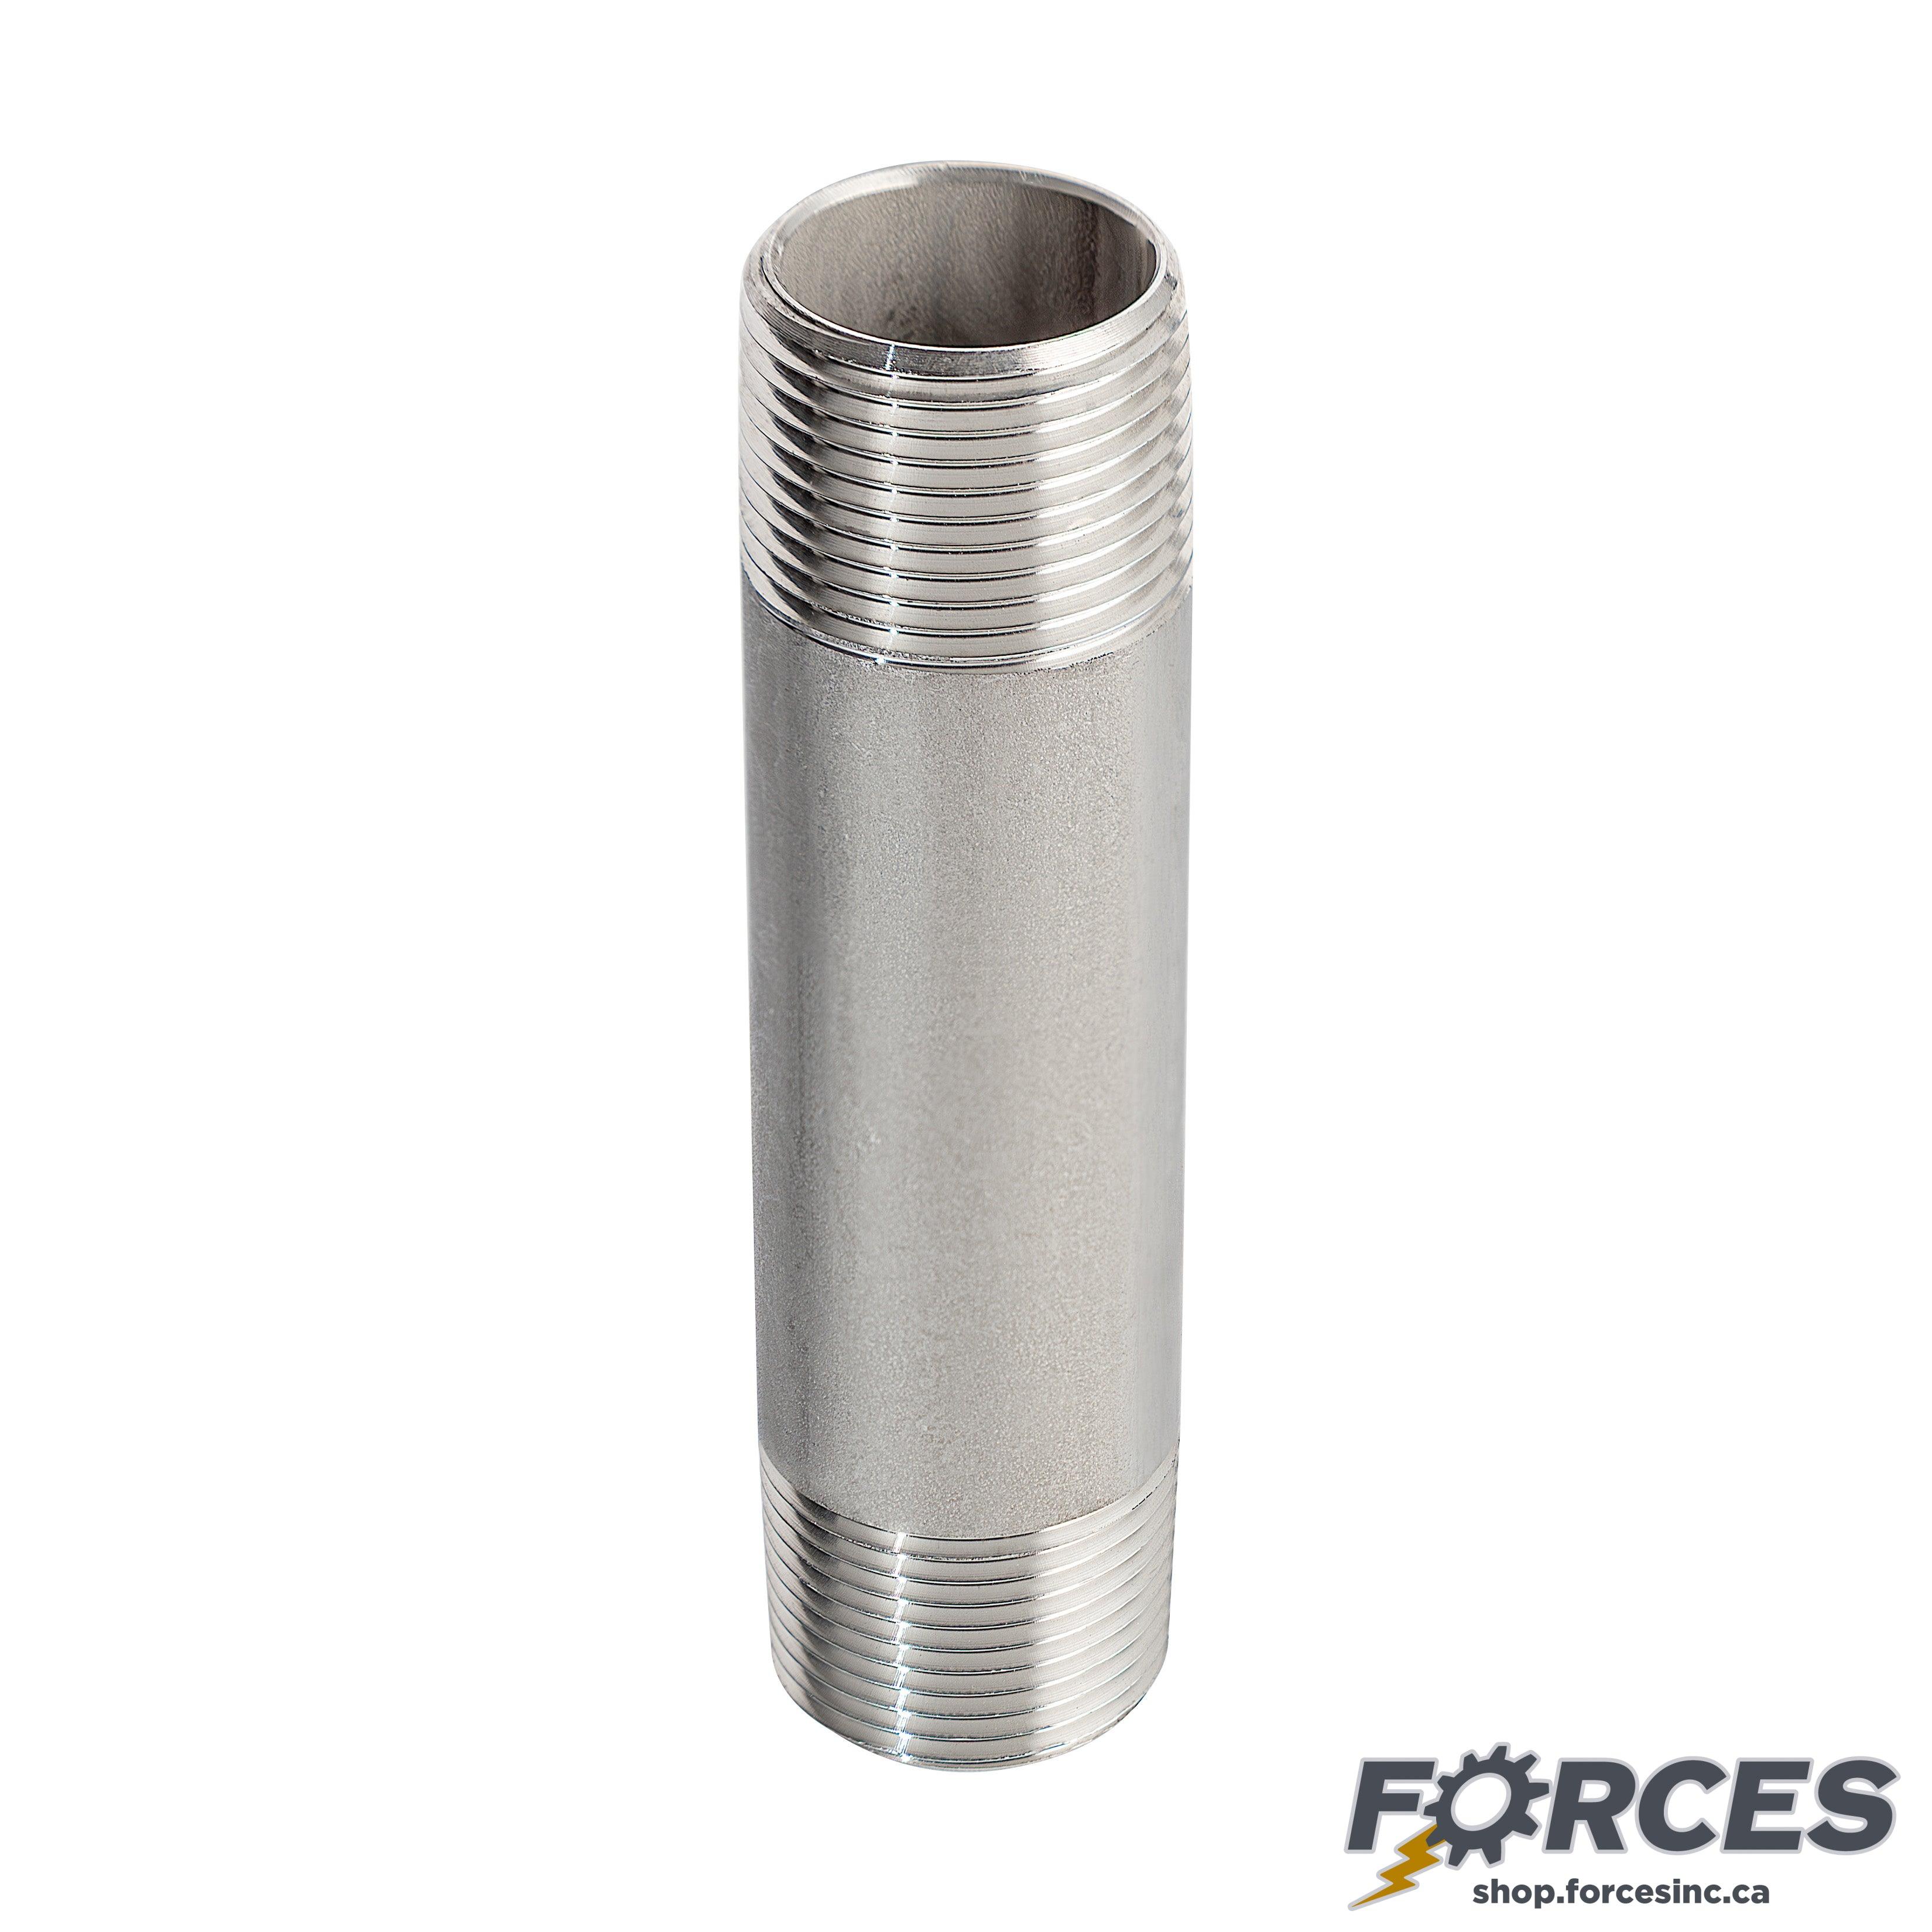 1" X 3" Long Nipple - Stainless Steel 316 - Forces Inc